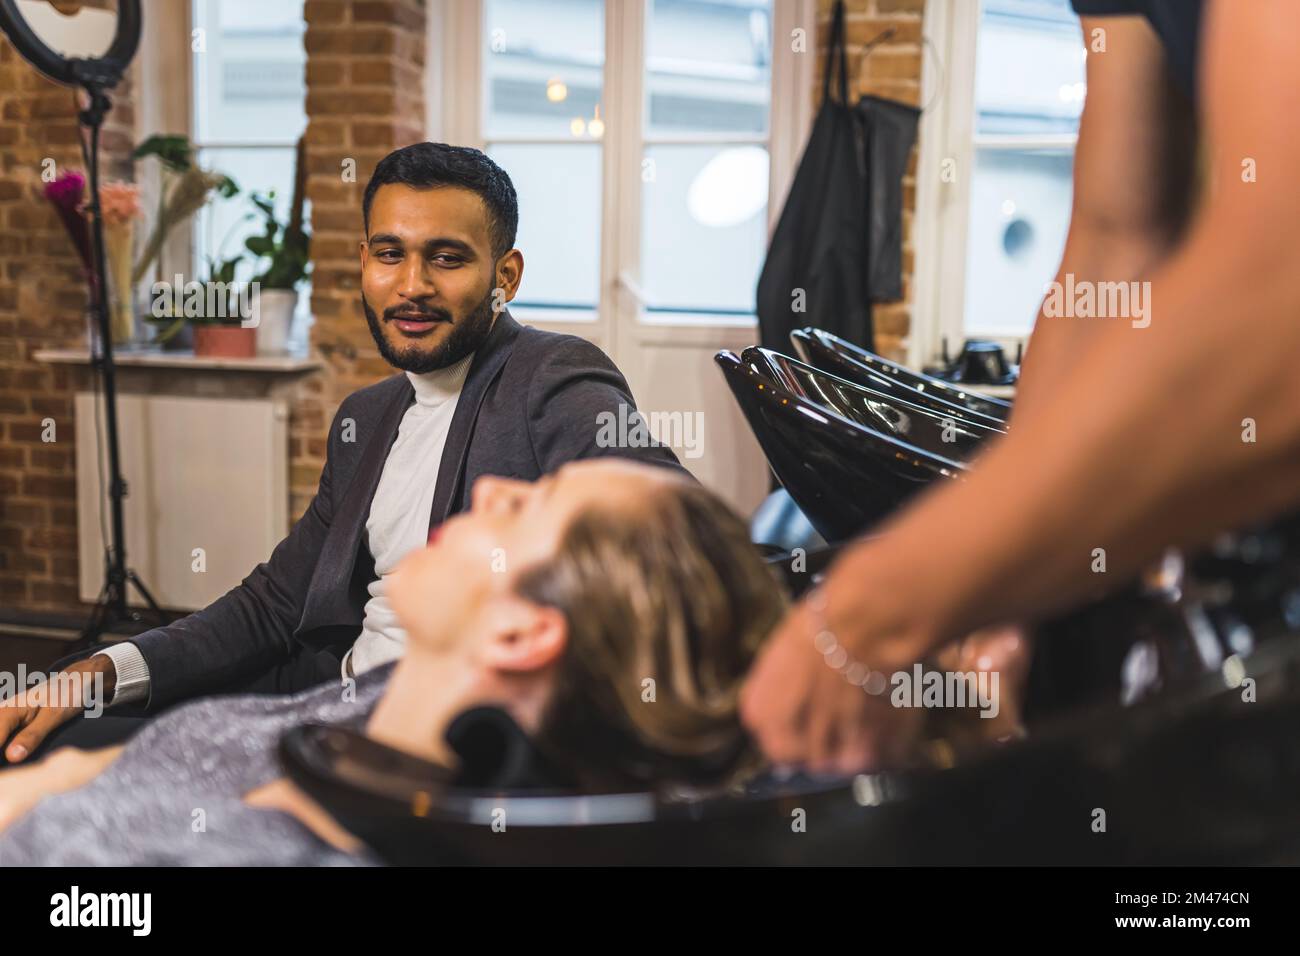 Smiling husband looking at his wife having her hair washed by expert hair stylist at their favorite hairdresser place. High quality photo Stock Photo